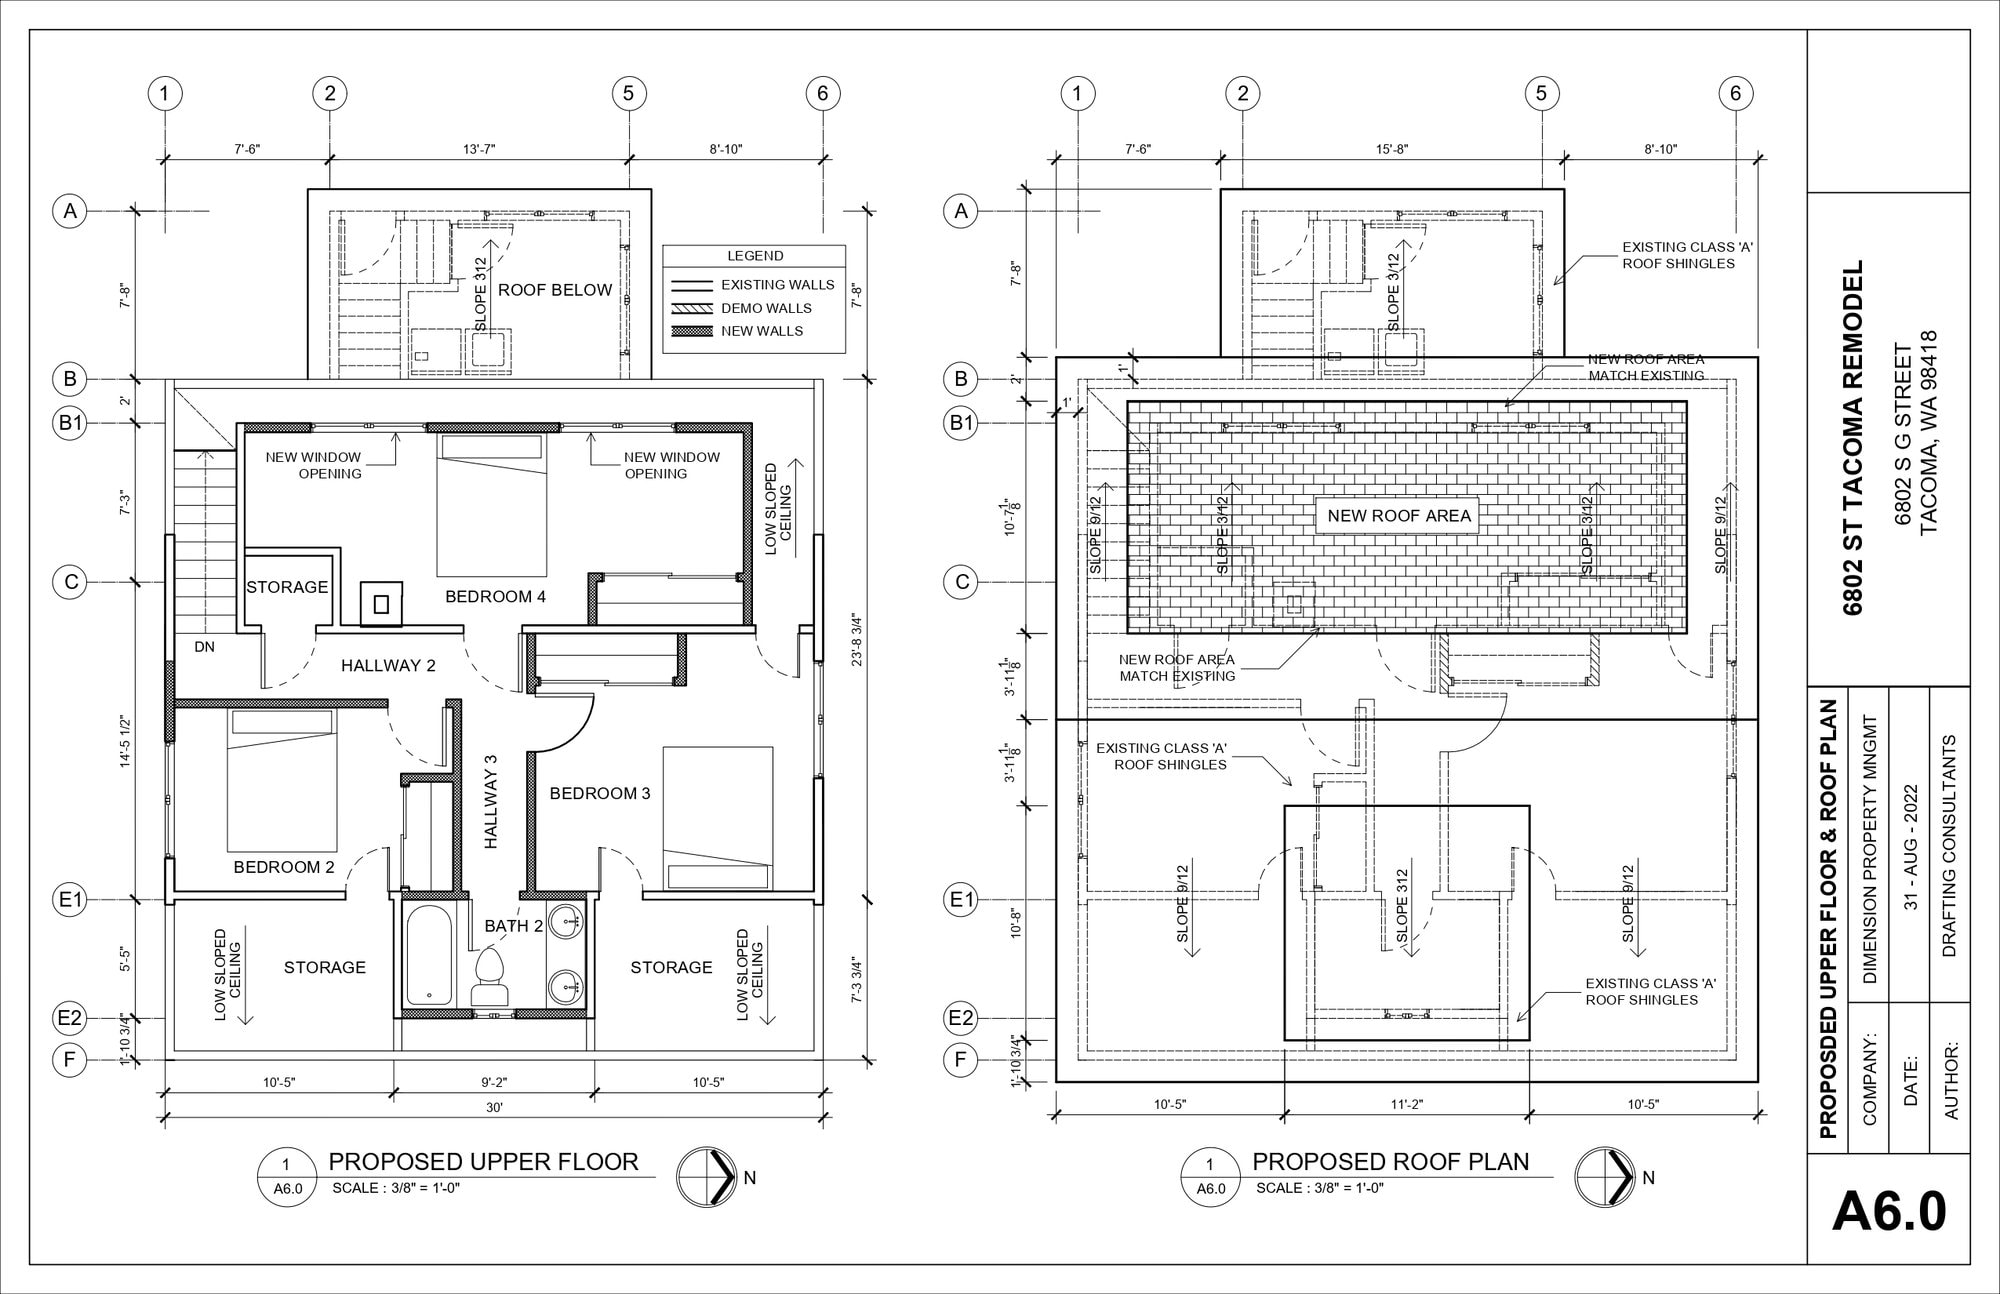 Architectural Cad Drawings | Architectural CAD Drafting Services